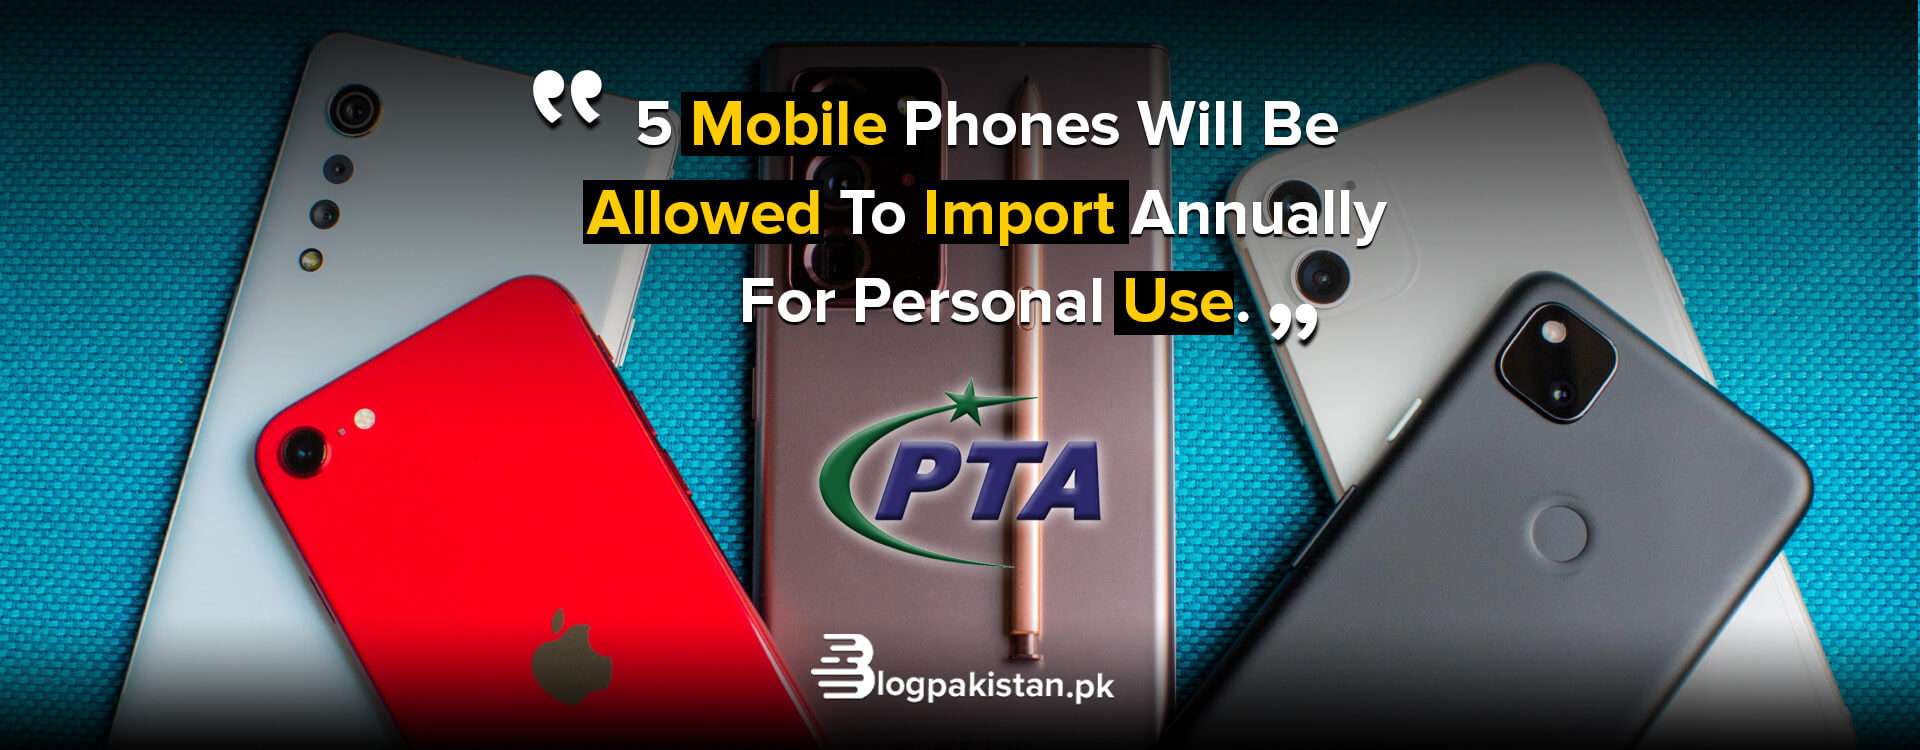 now pakistanis can import 5 mobiles in yearly basis